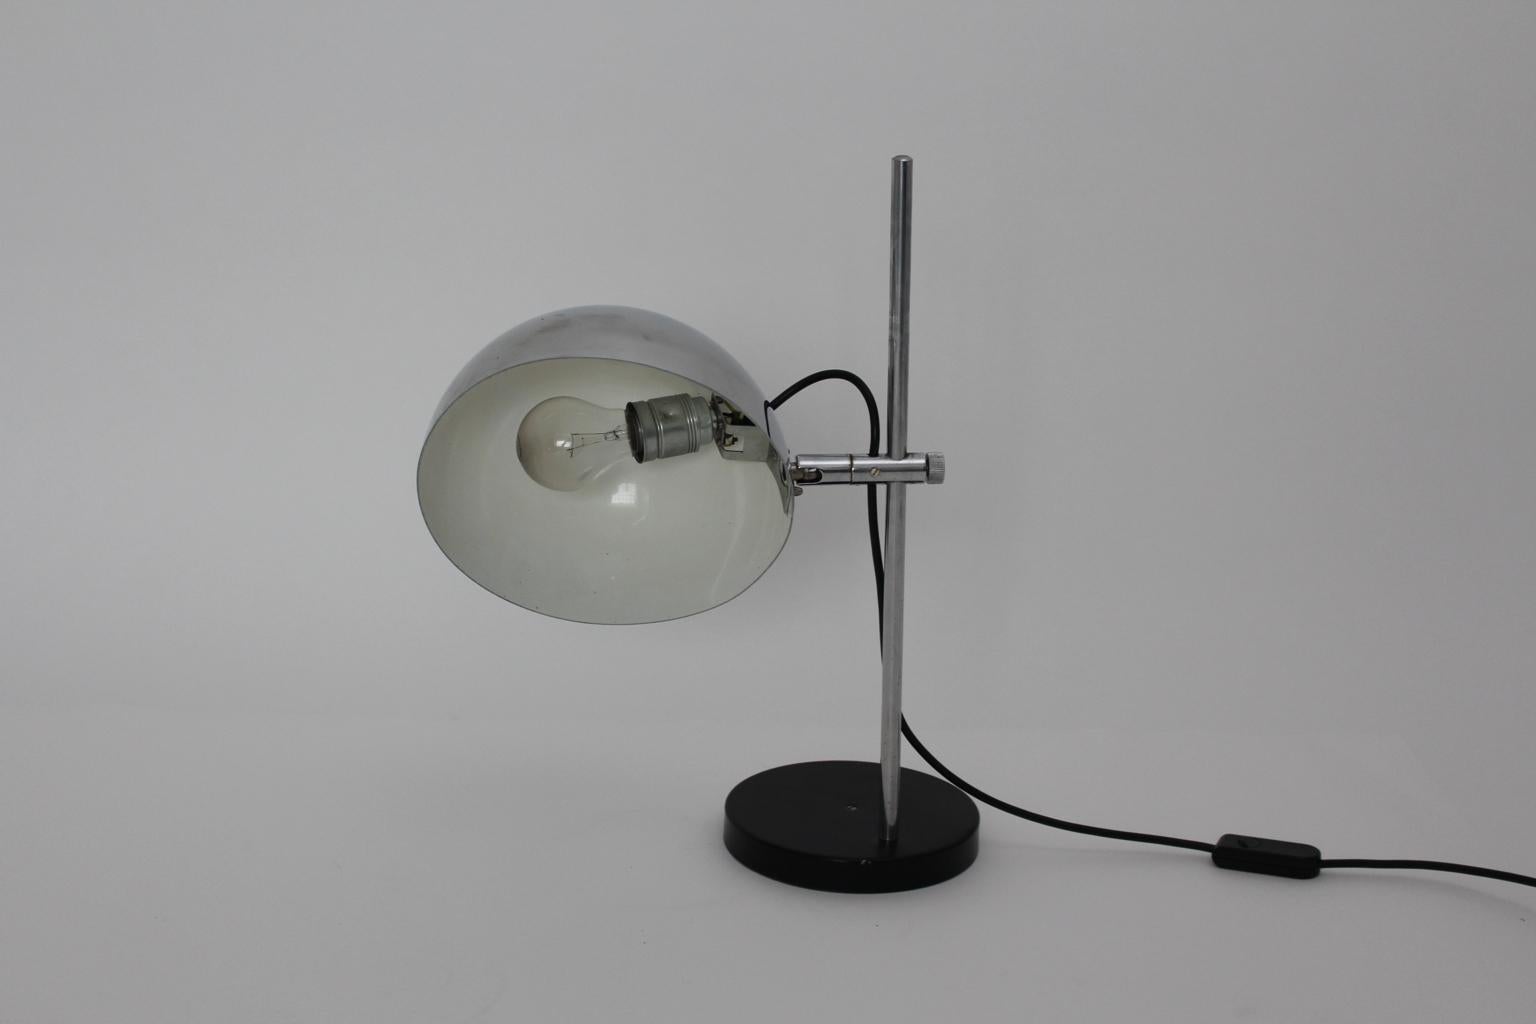 Polychromed Mid-Century Modern Vintage Chromed Table Lamp by Omi Elux 1960 Germany For Sale